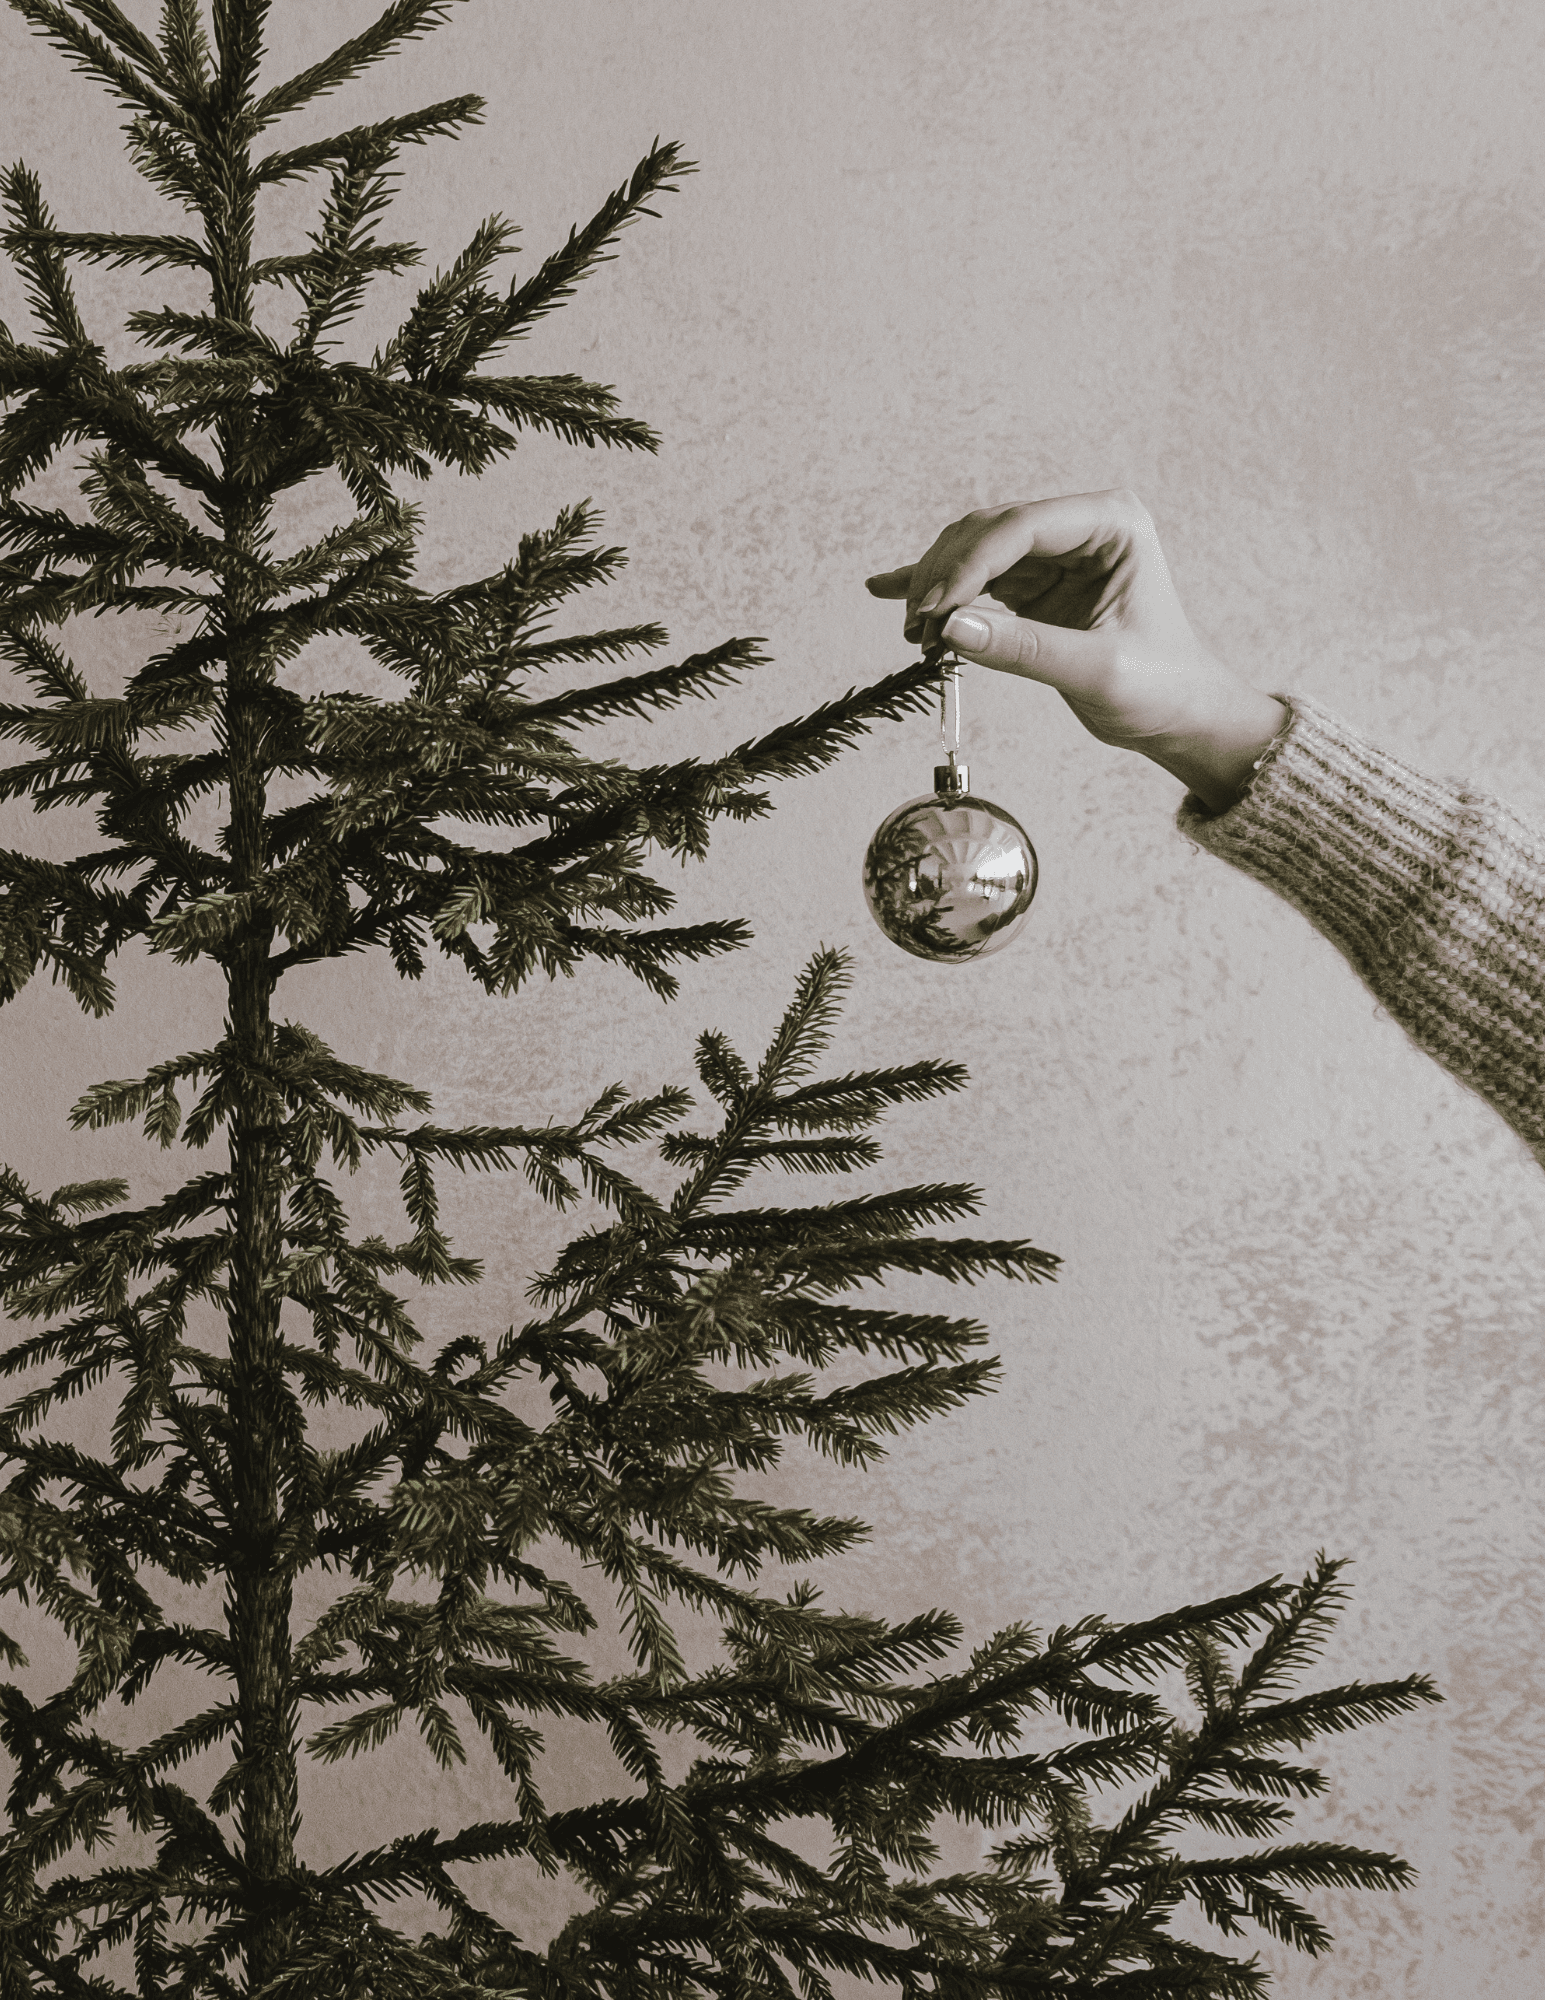 hand removing christmas ornament from tree